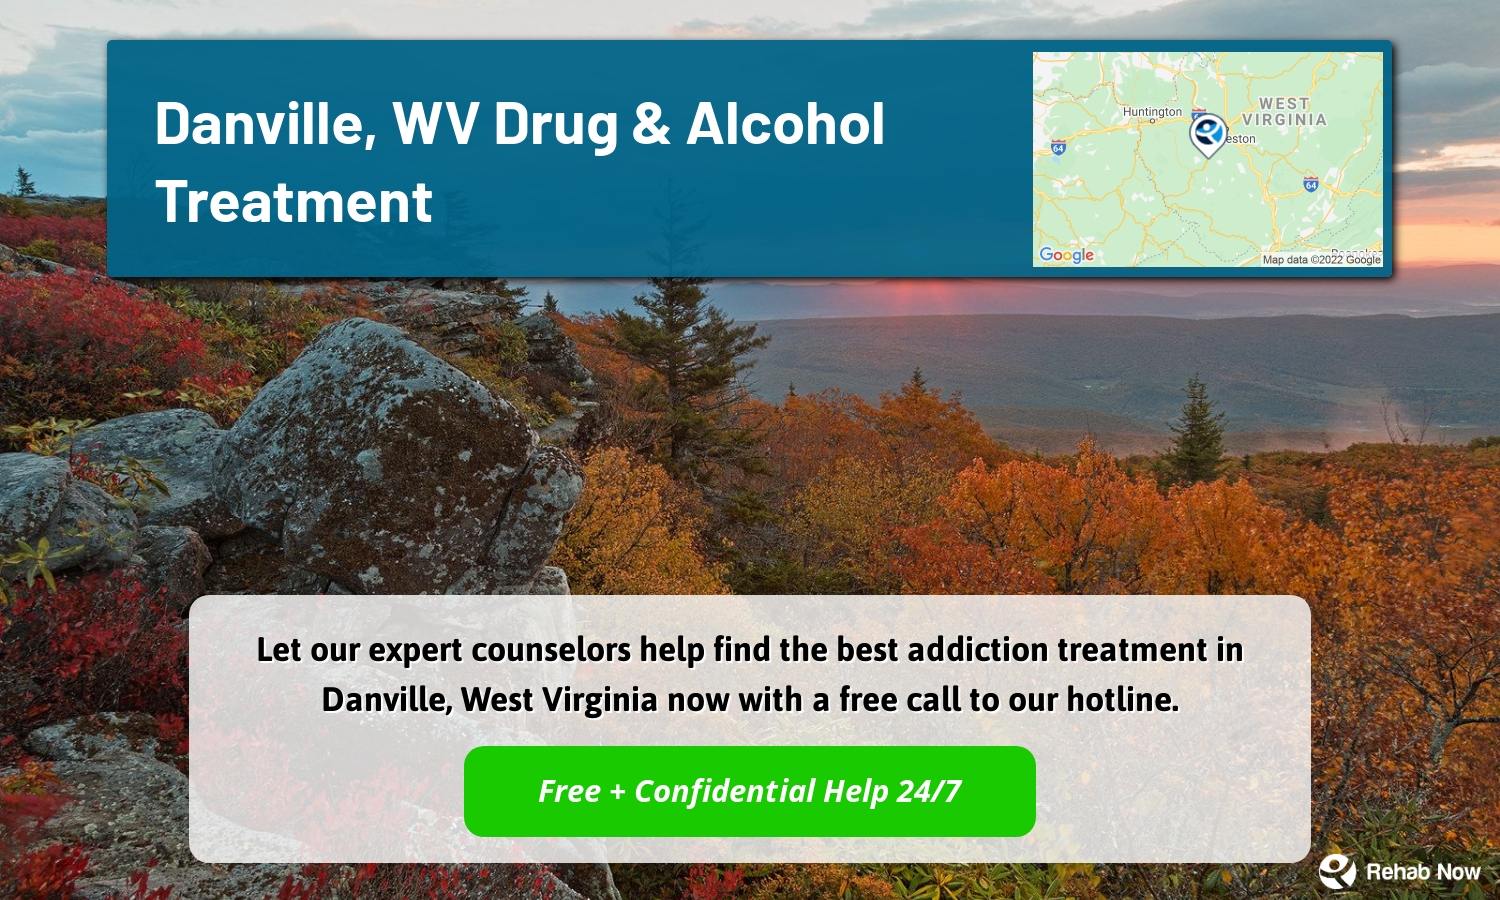 Let our expert counselors help find the best addiction treatment in Danville, West Virginia now with a free call to our hotline.